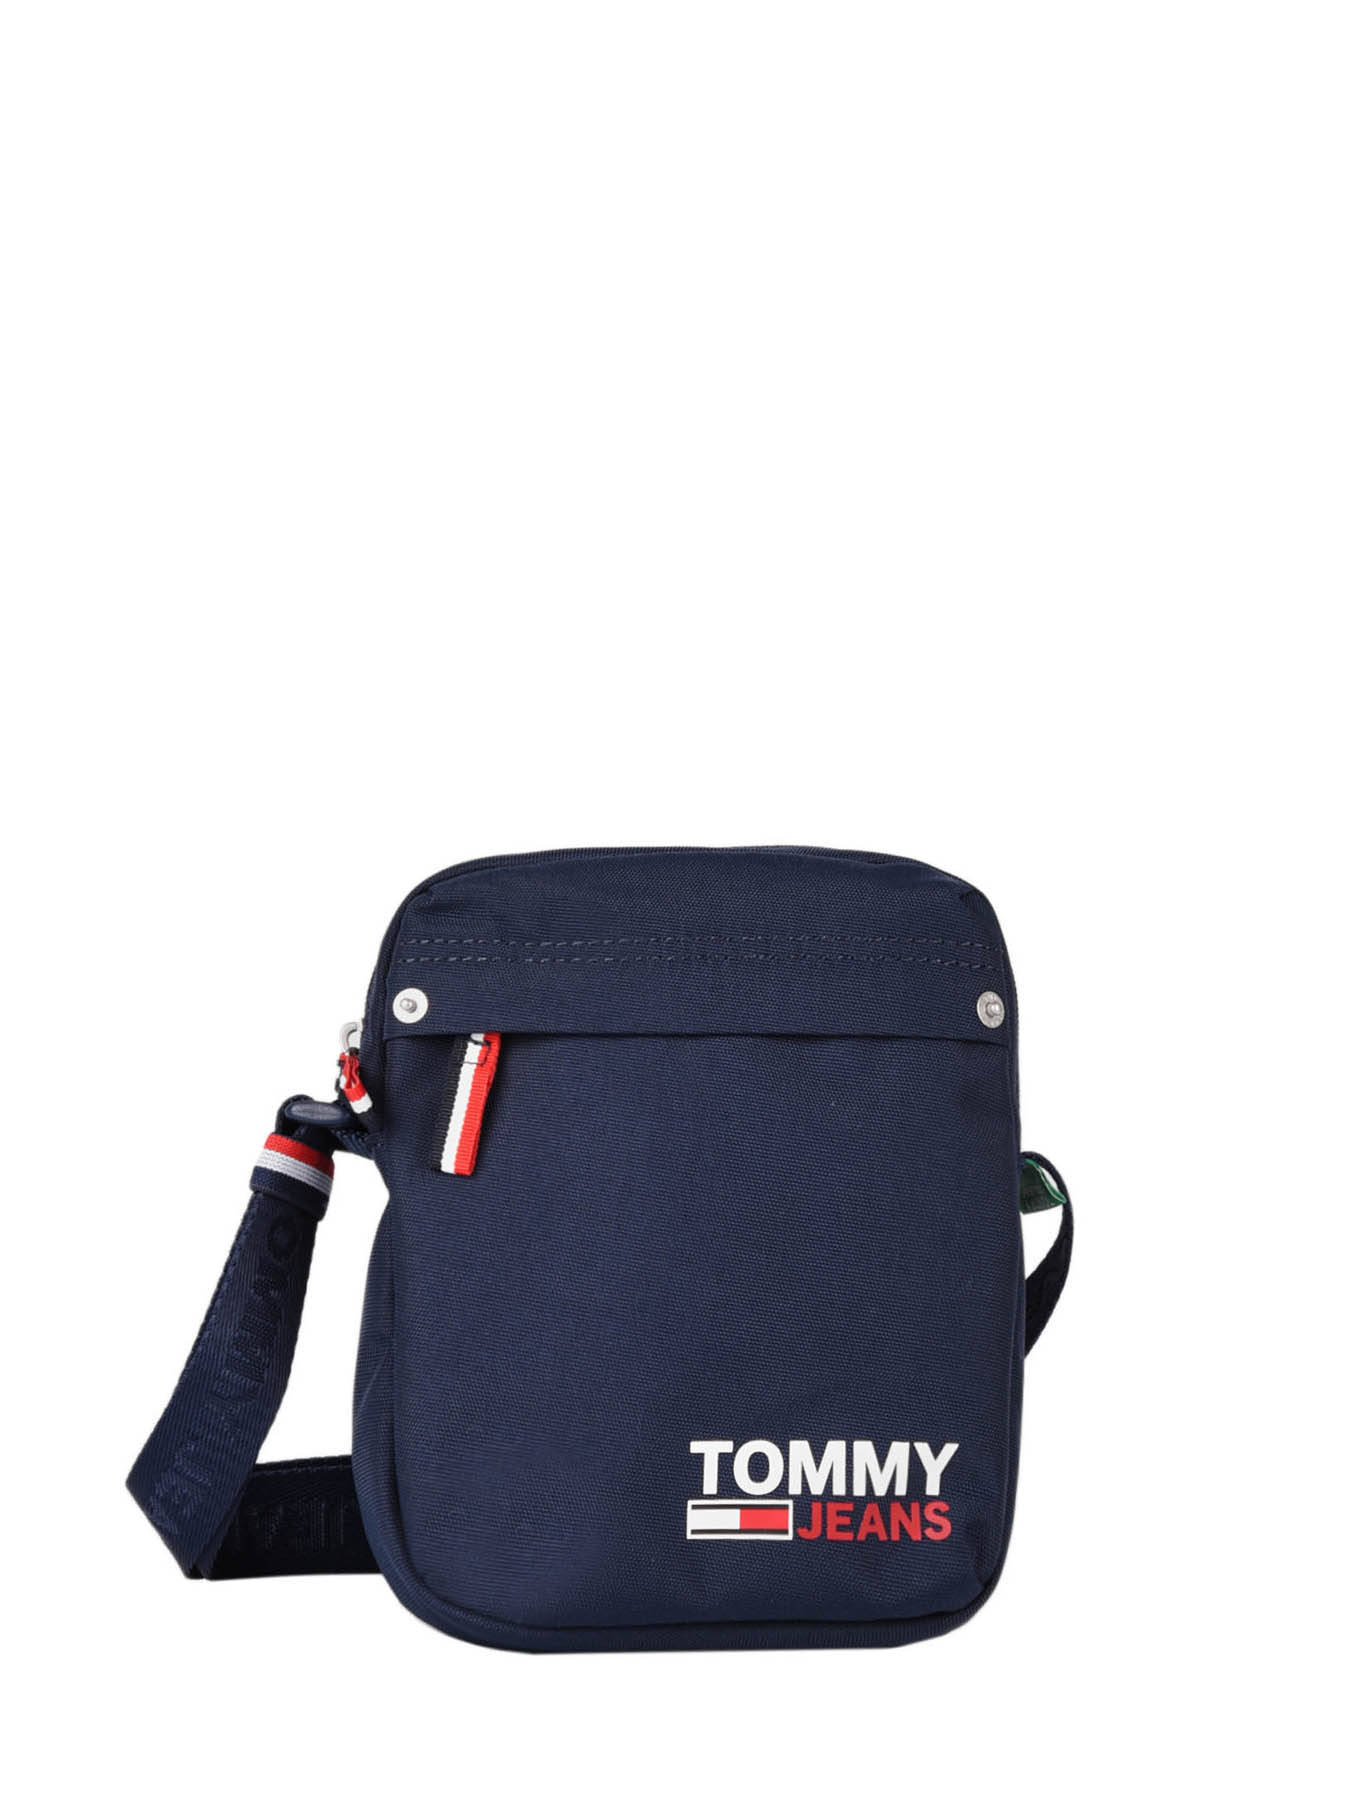 tommy jeans bags